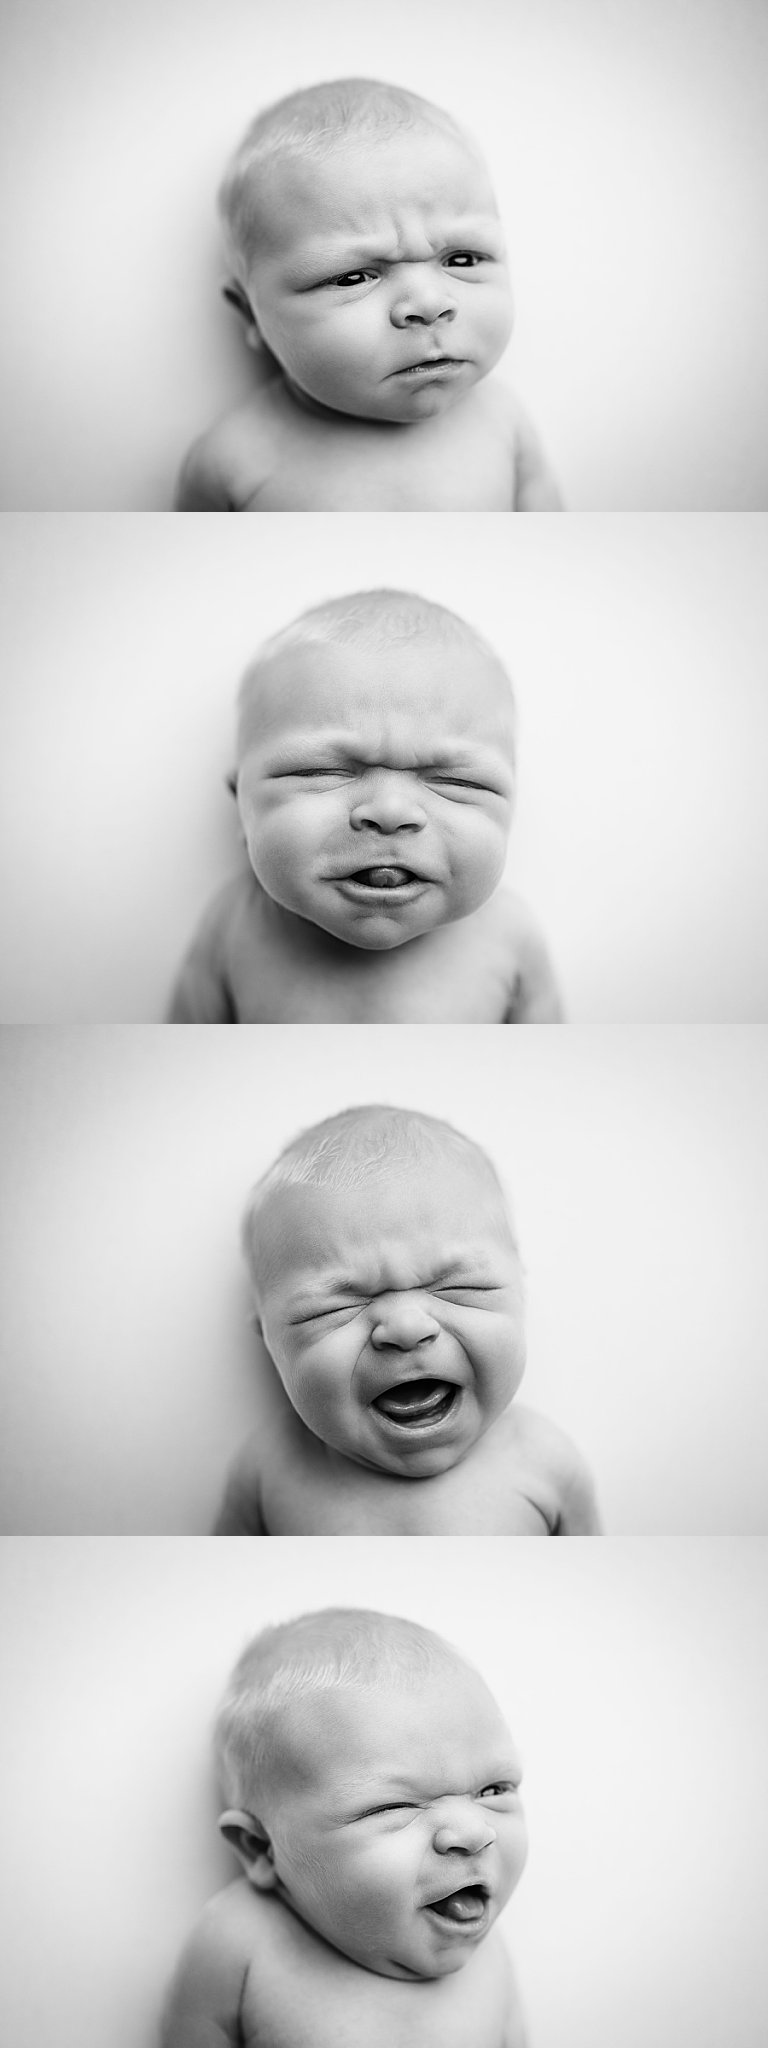 baby makes many different faces by Charlottesville Photographer